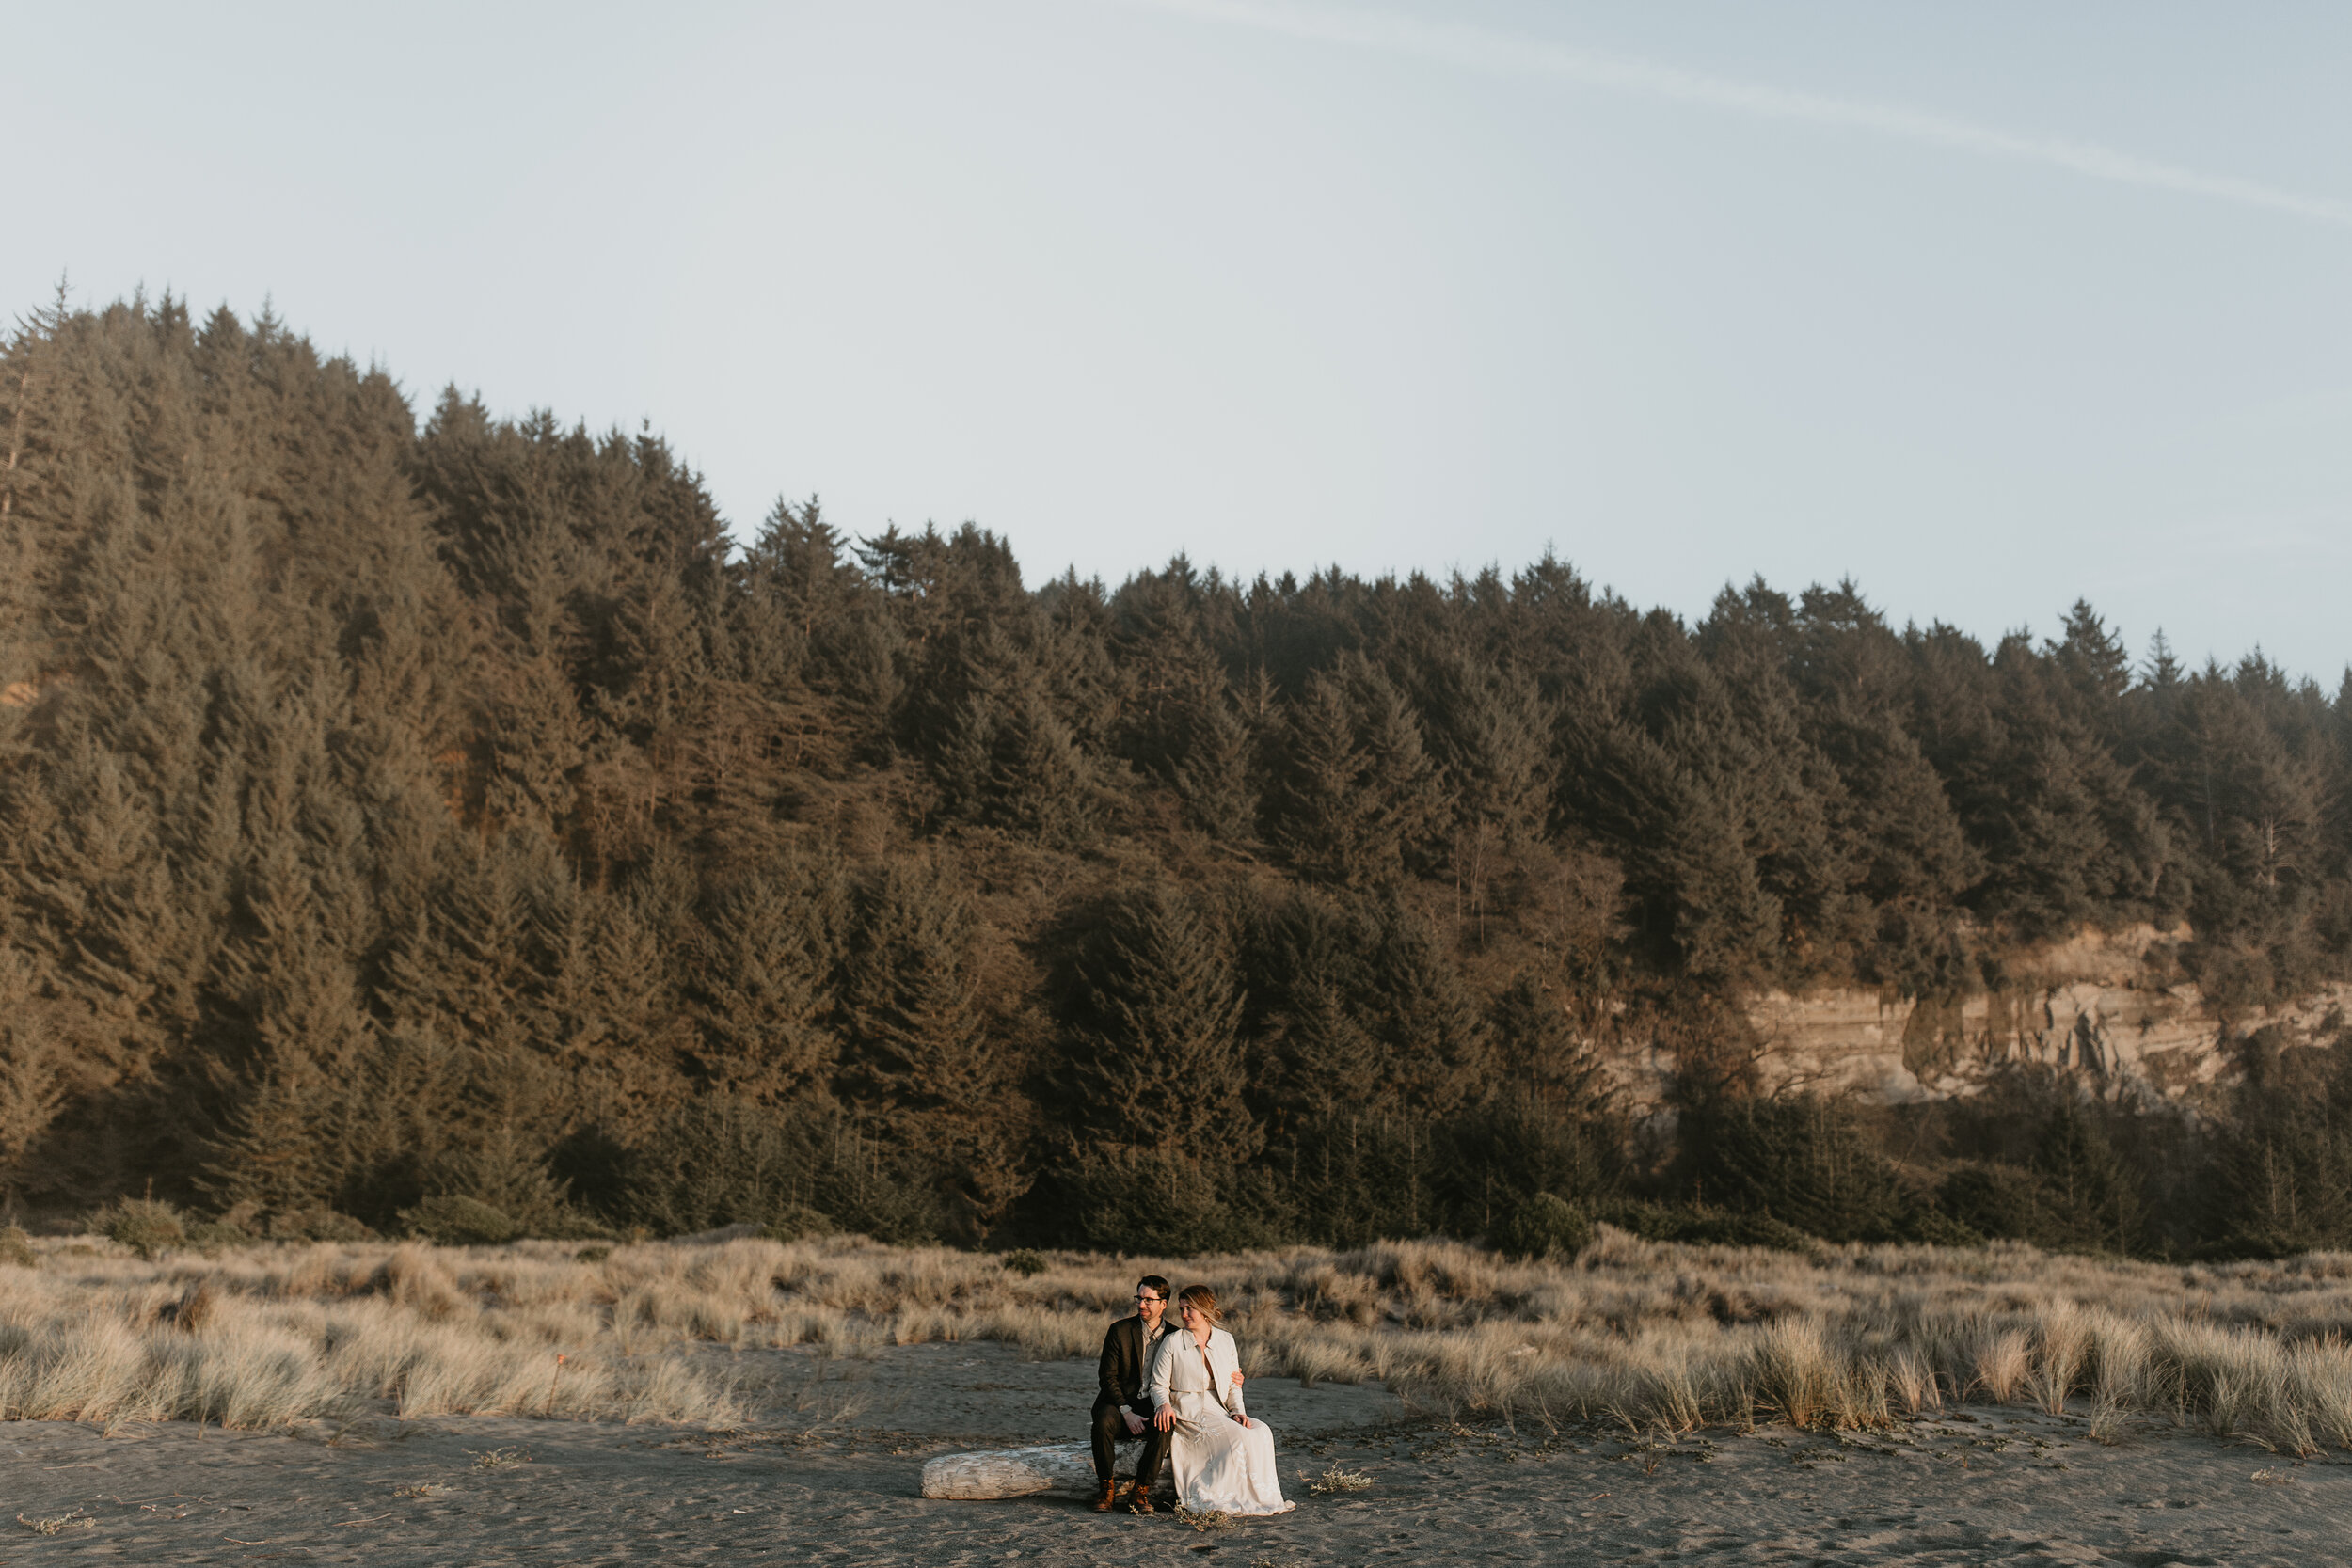 nicole-daacke-photography-redwood-forest-elopement-in-northern-california-patricks-point-coast-adventure-elopement-photography-redwoods-elopement-photographer-218.jpg